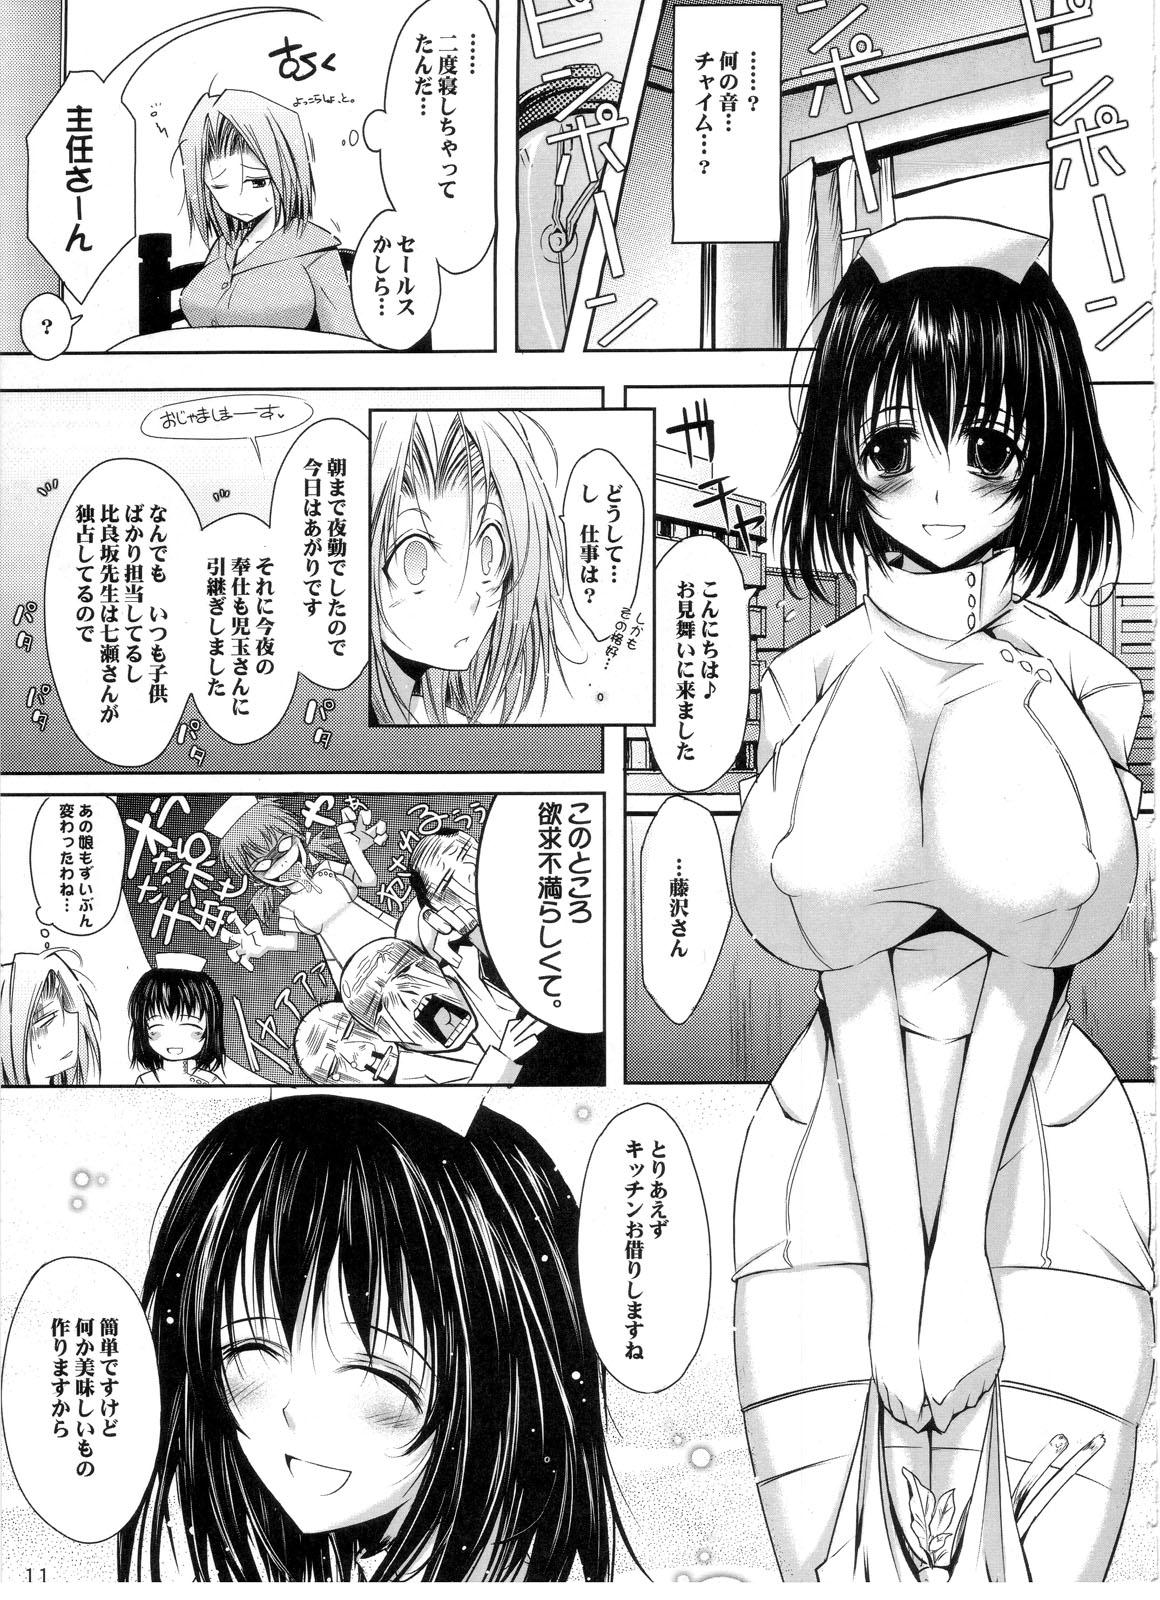 Newbie Otome Byoutou - Night shift nurses All Natural - Page 10